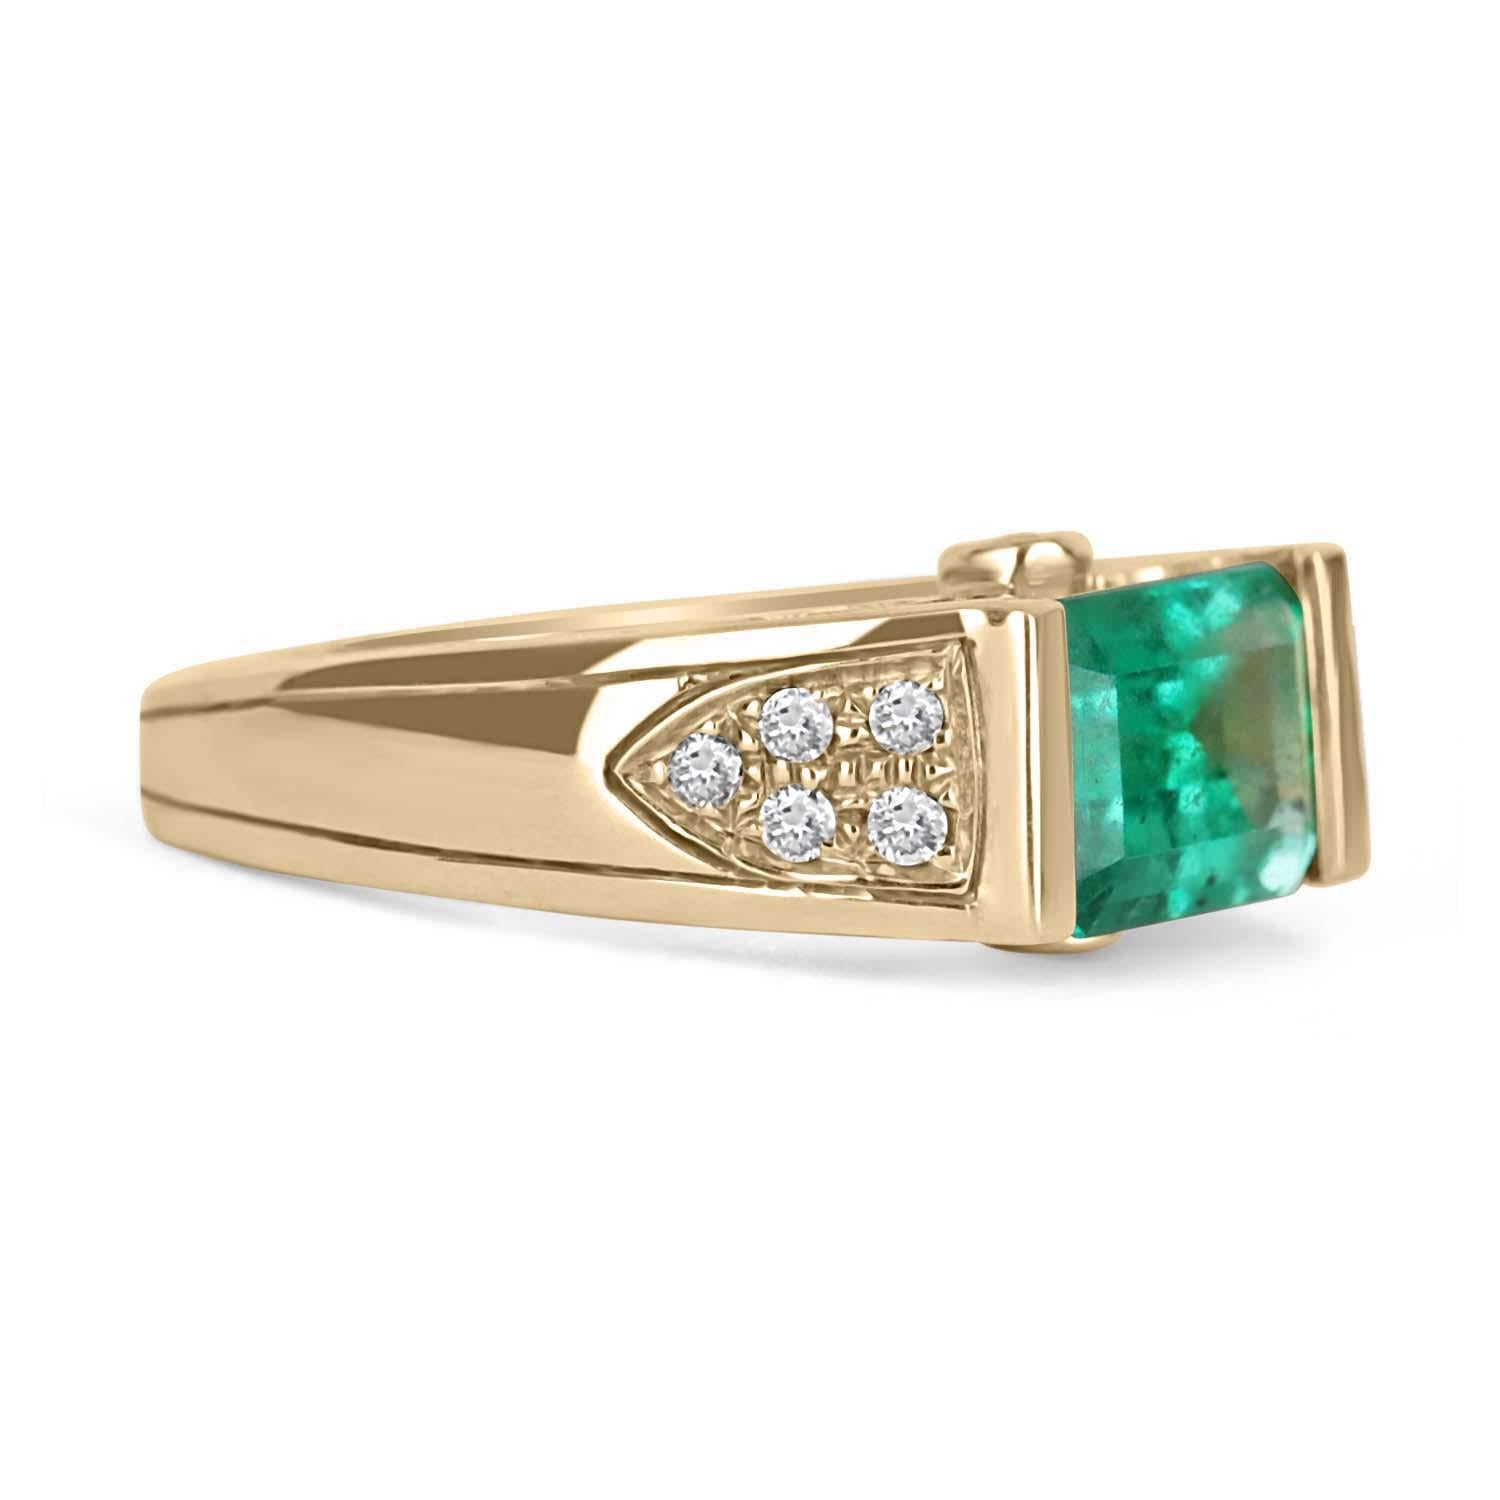 An East to West statement, or right-hand ring. Dexterously crafted in gleaming 14K gold this ring features a 2.34-carat natural Colombian emerald-emerald cut. Set in a tension setting, showing off its incredible cut. This emerald has very good eye